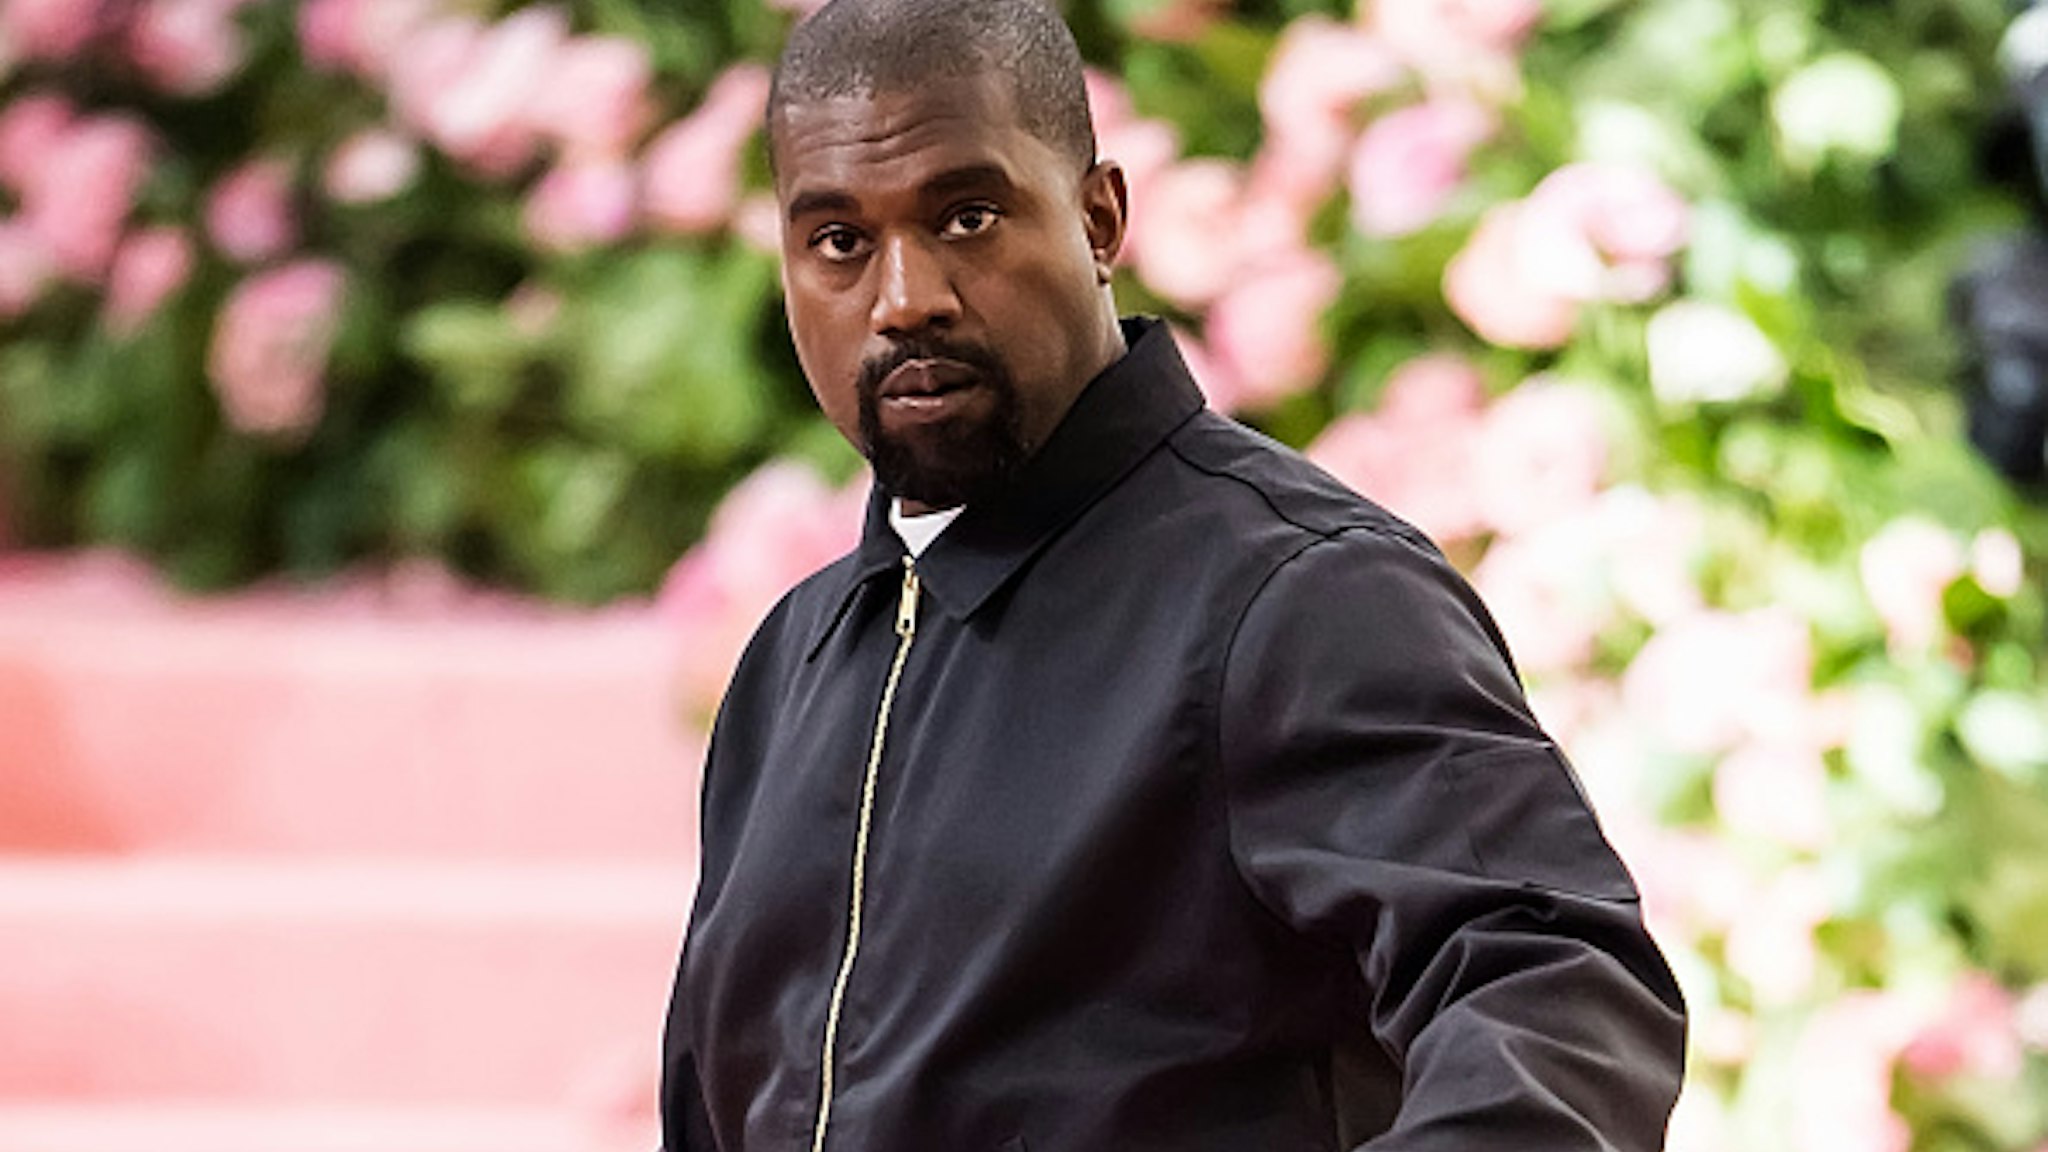 NEW YORK, NY - MAY 06: Kanye West is seen arriving to the 2019 Met Gala Celebrating Camp: Notes on Fashion at The Metropolitan Museum of Art on May 6, 2019 in New York City.